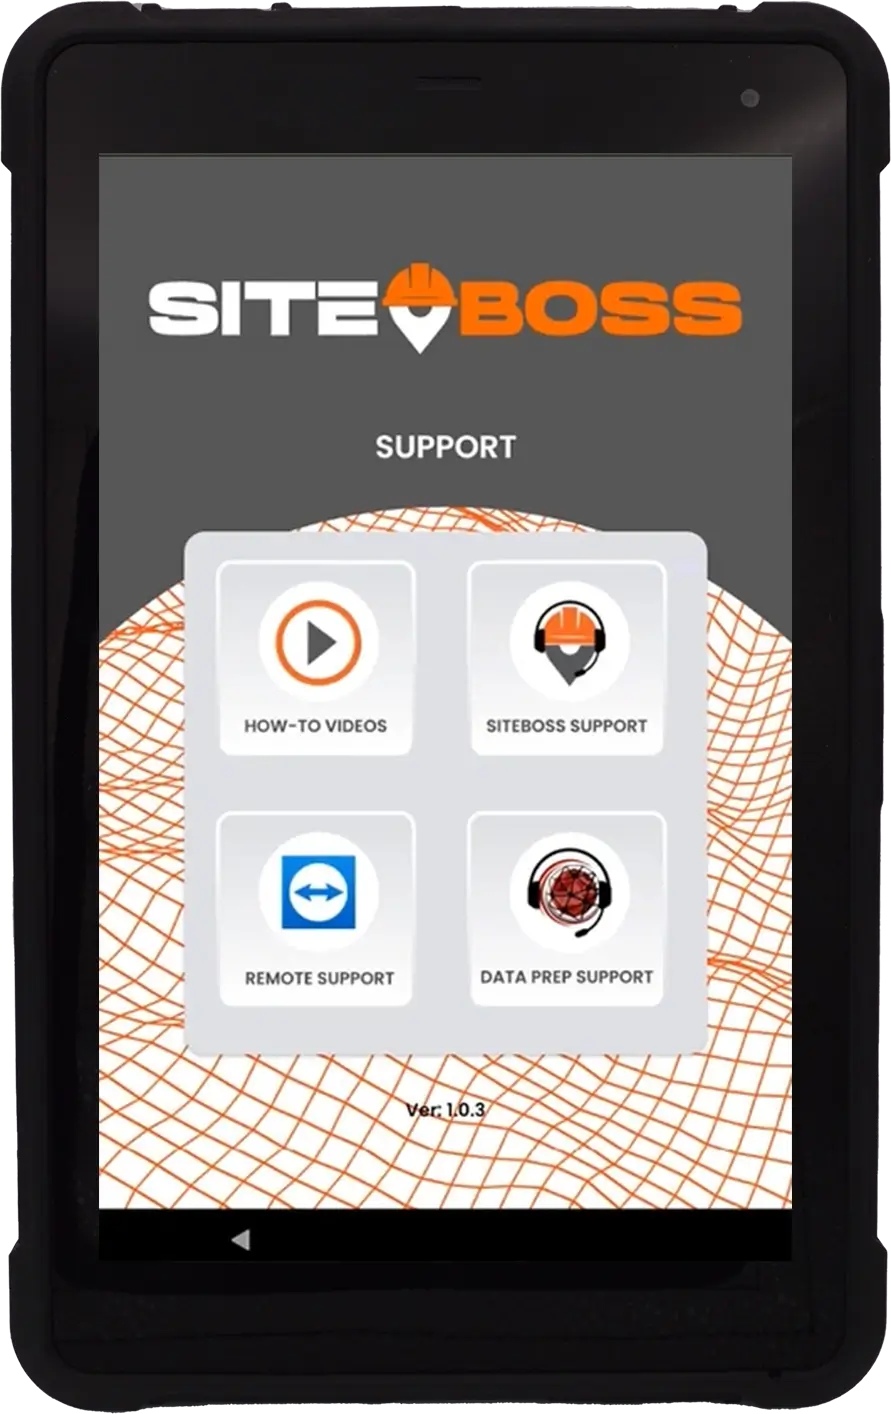 Tablet device with SiteBoss app home screen